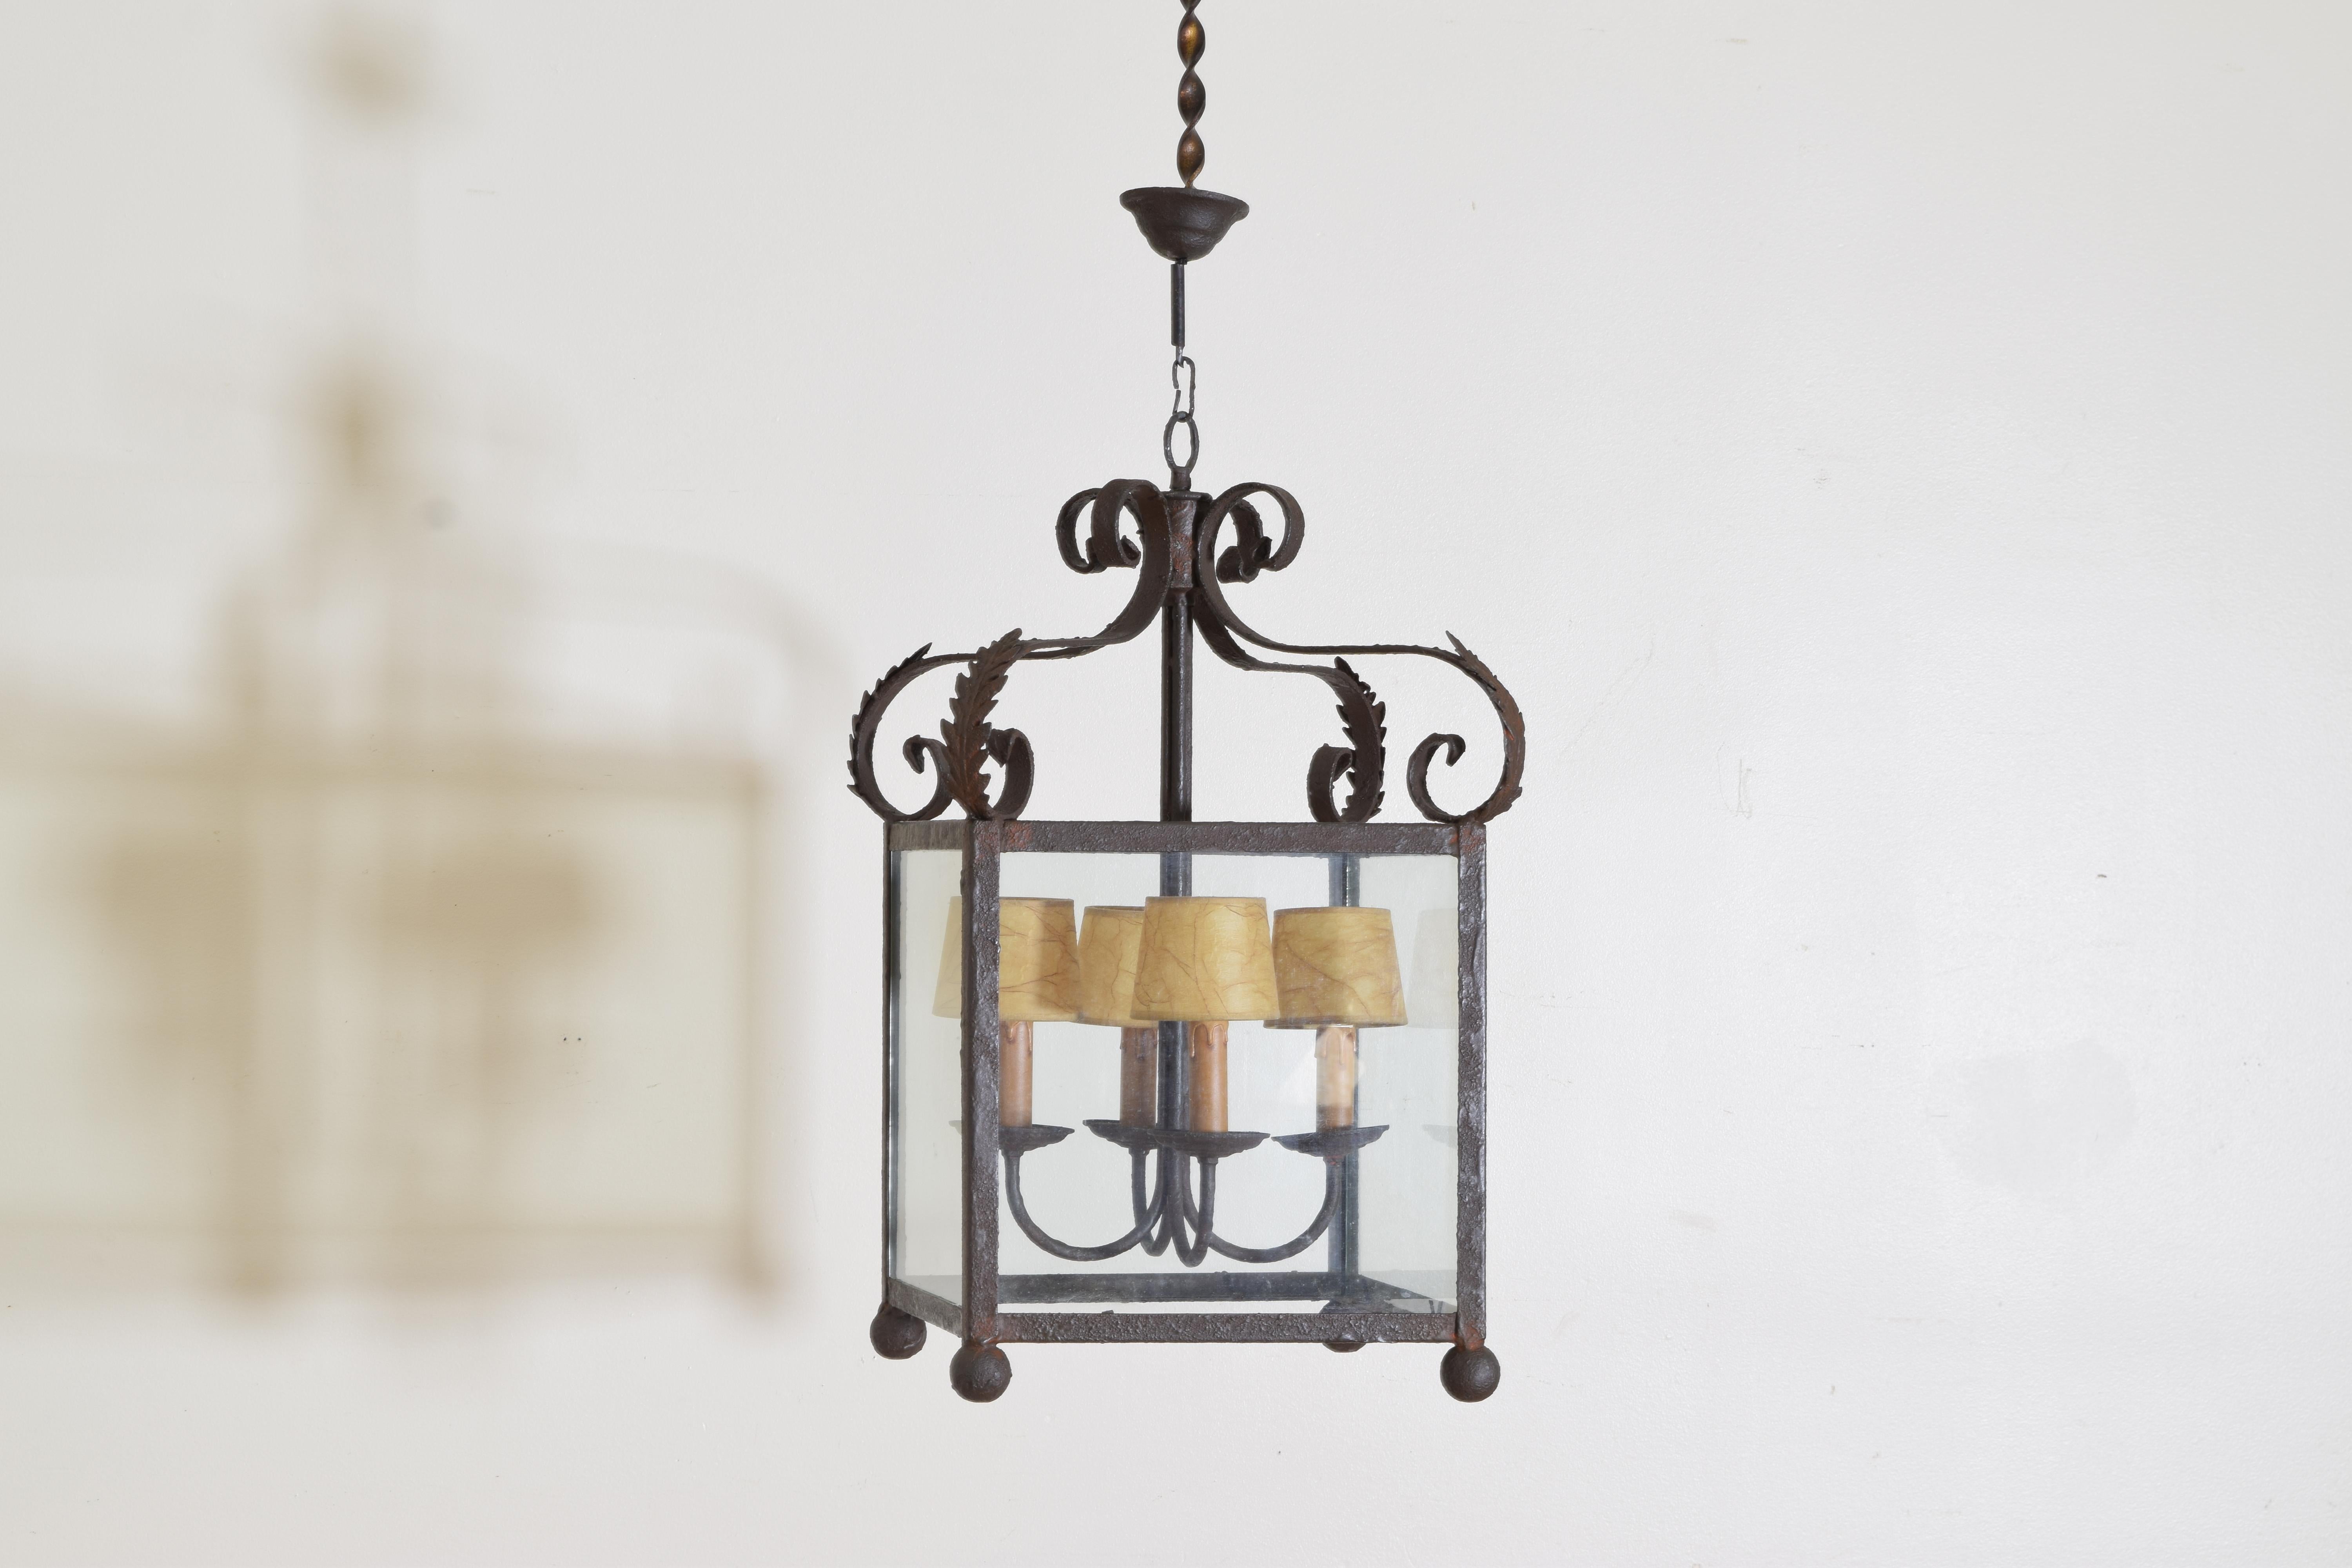 Hanging from a central ring the top with four scroll supports each with applied metal leaves, the body 4 sided with ball feet, retaining original 4-light cluster, standard wiring included in price, UL wiring available for an additional $350